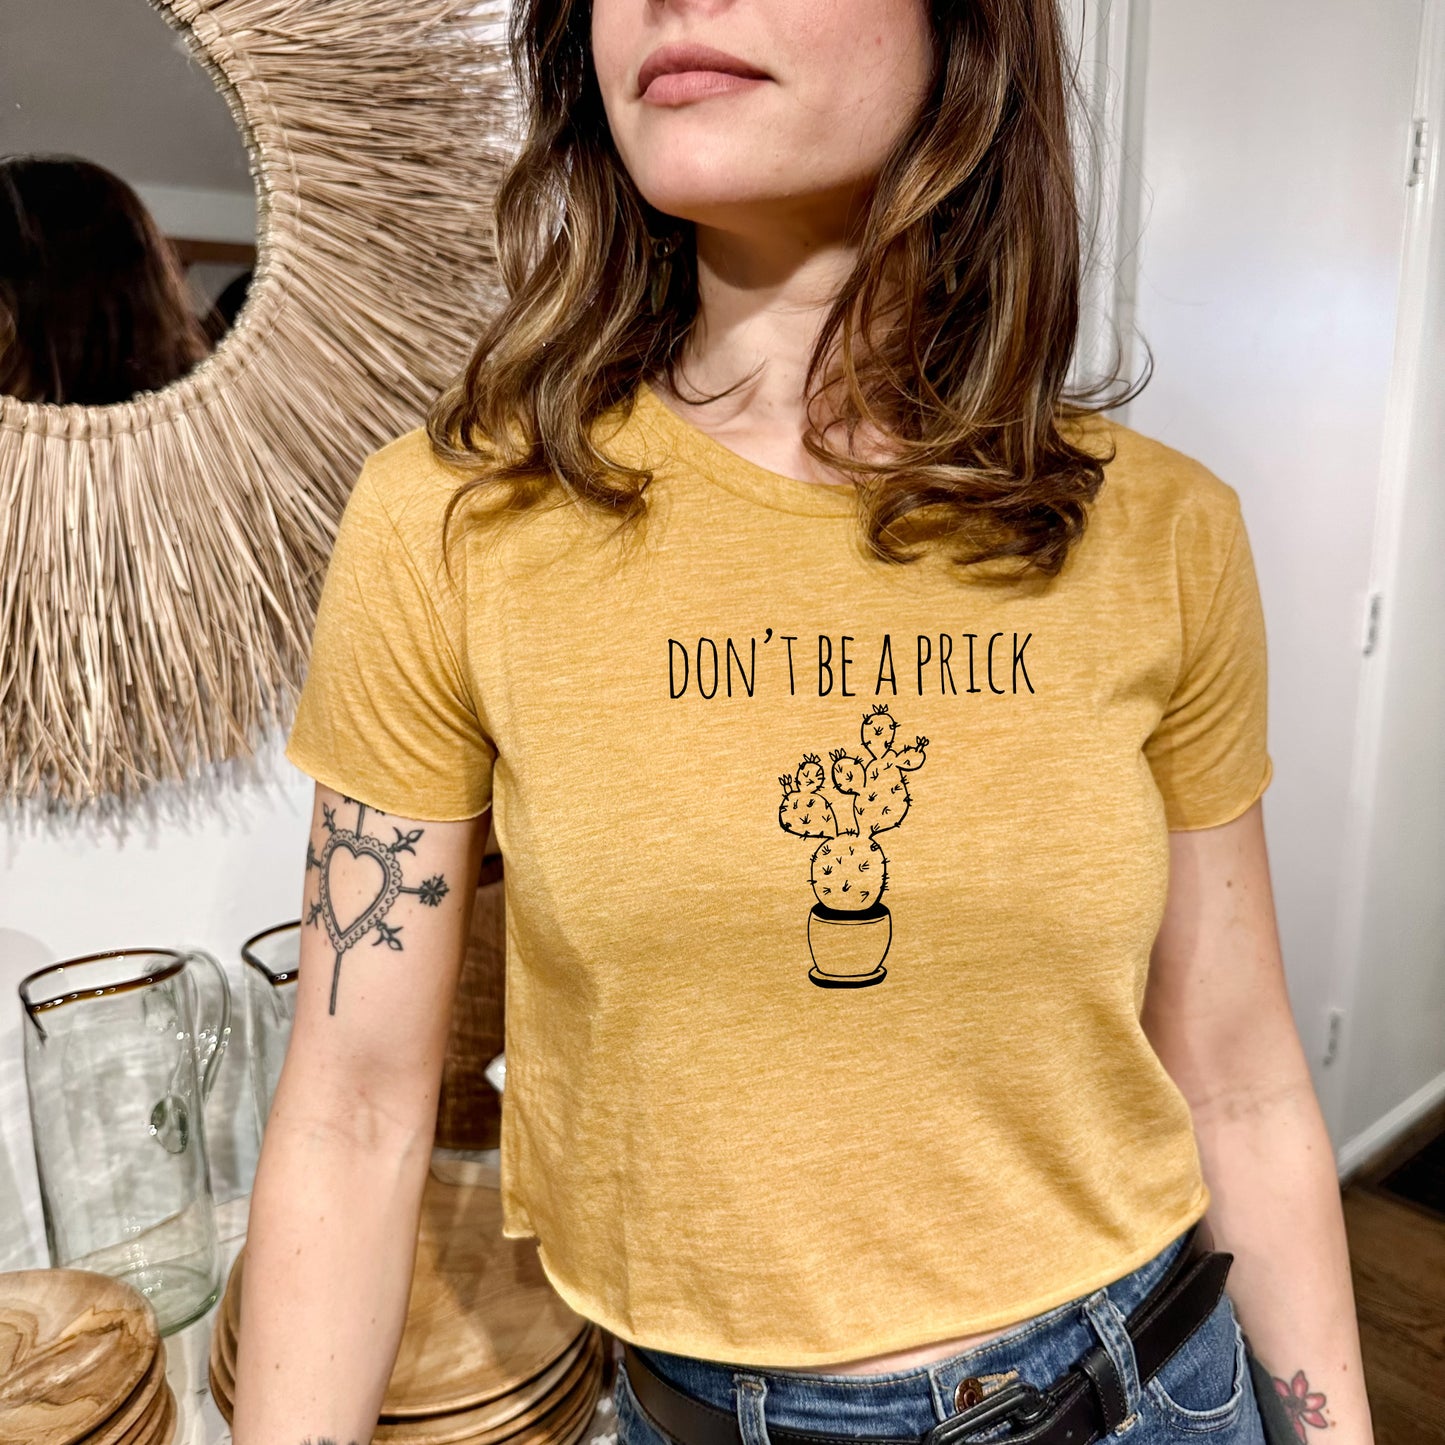 Don't Be A Prick - Women's Crop Tee - Heather Gray or Gold